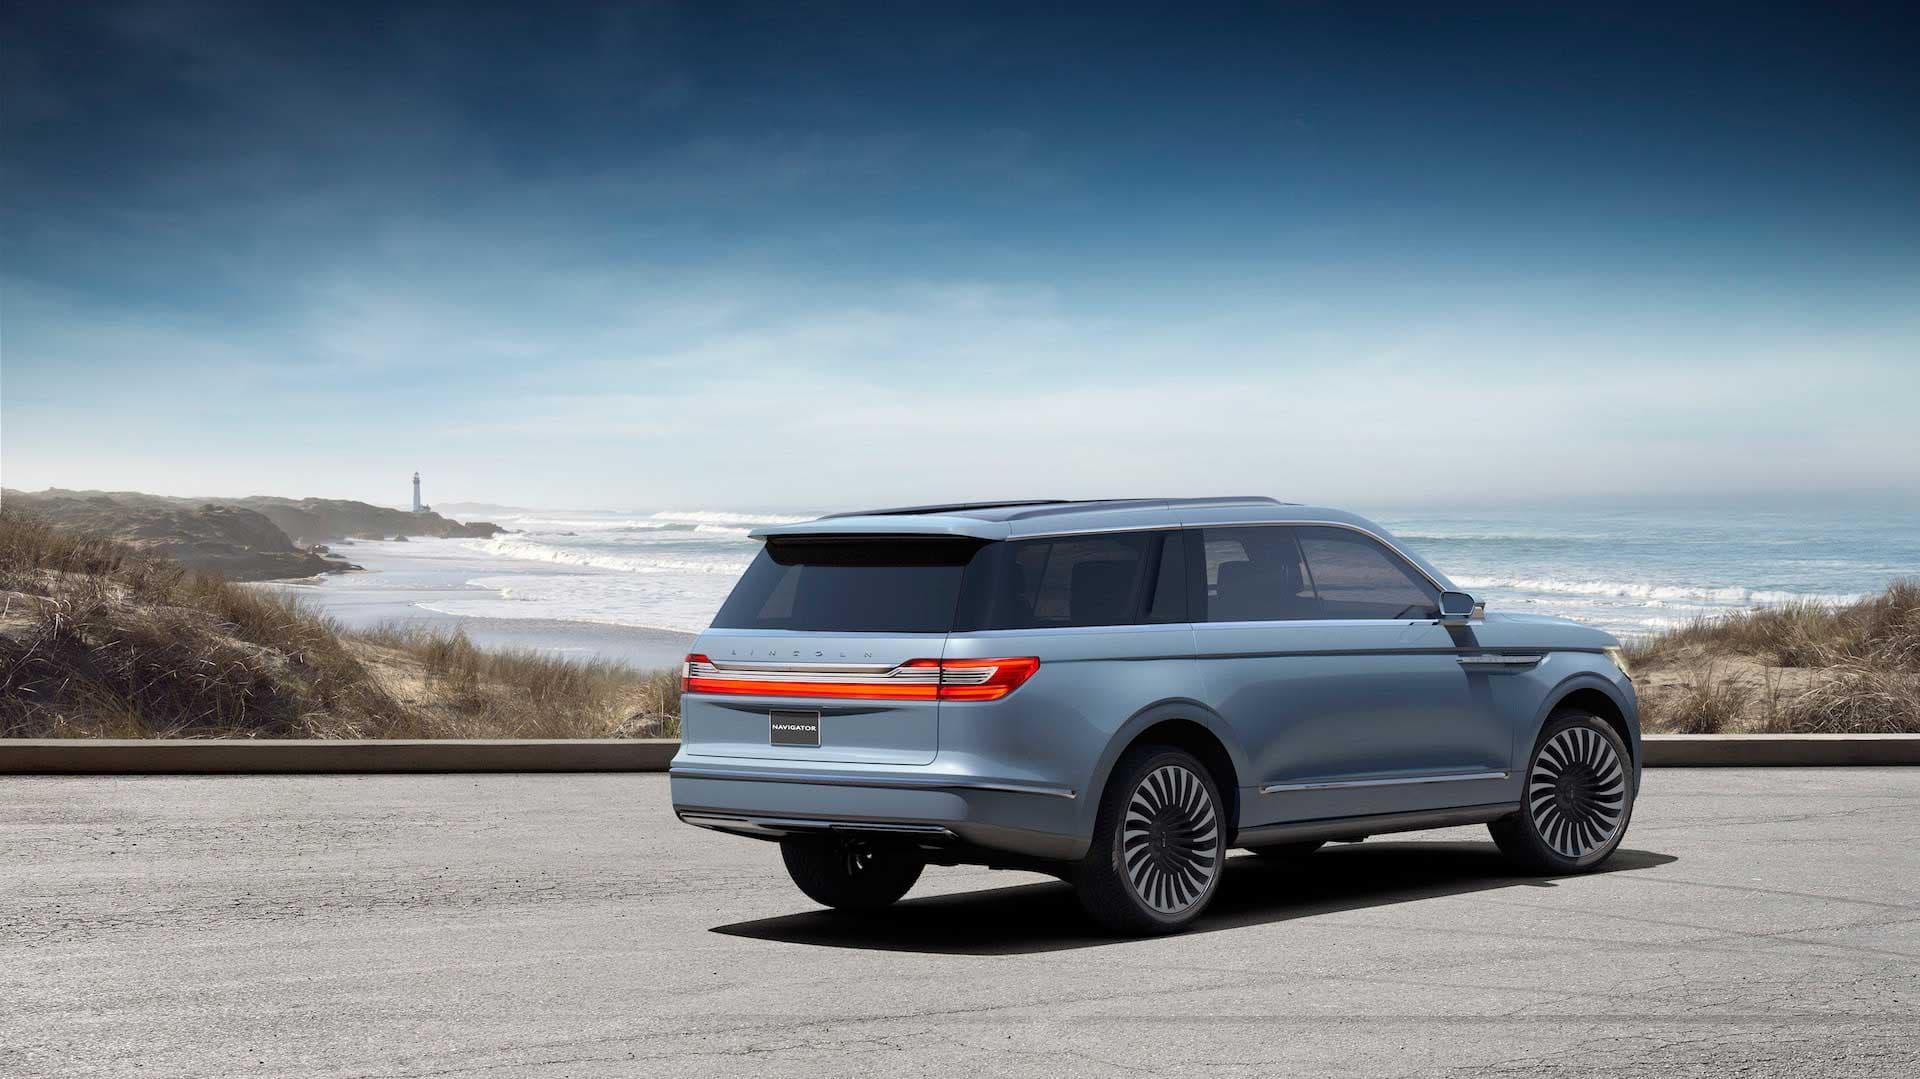 Can This New Navigator Concept Rescue Lincoln?